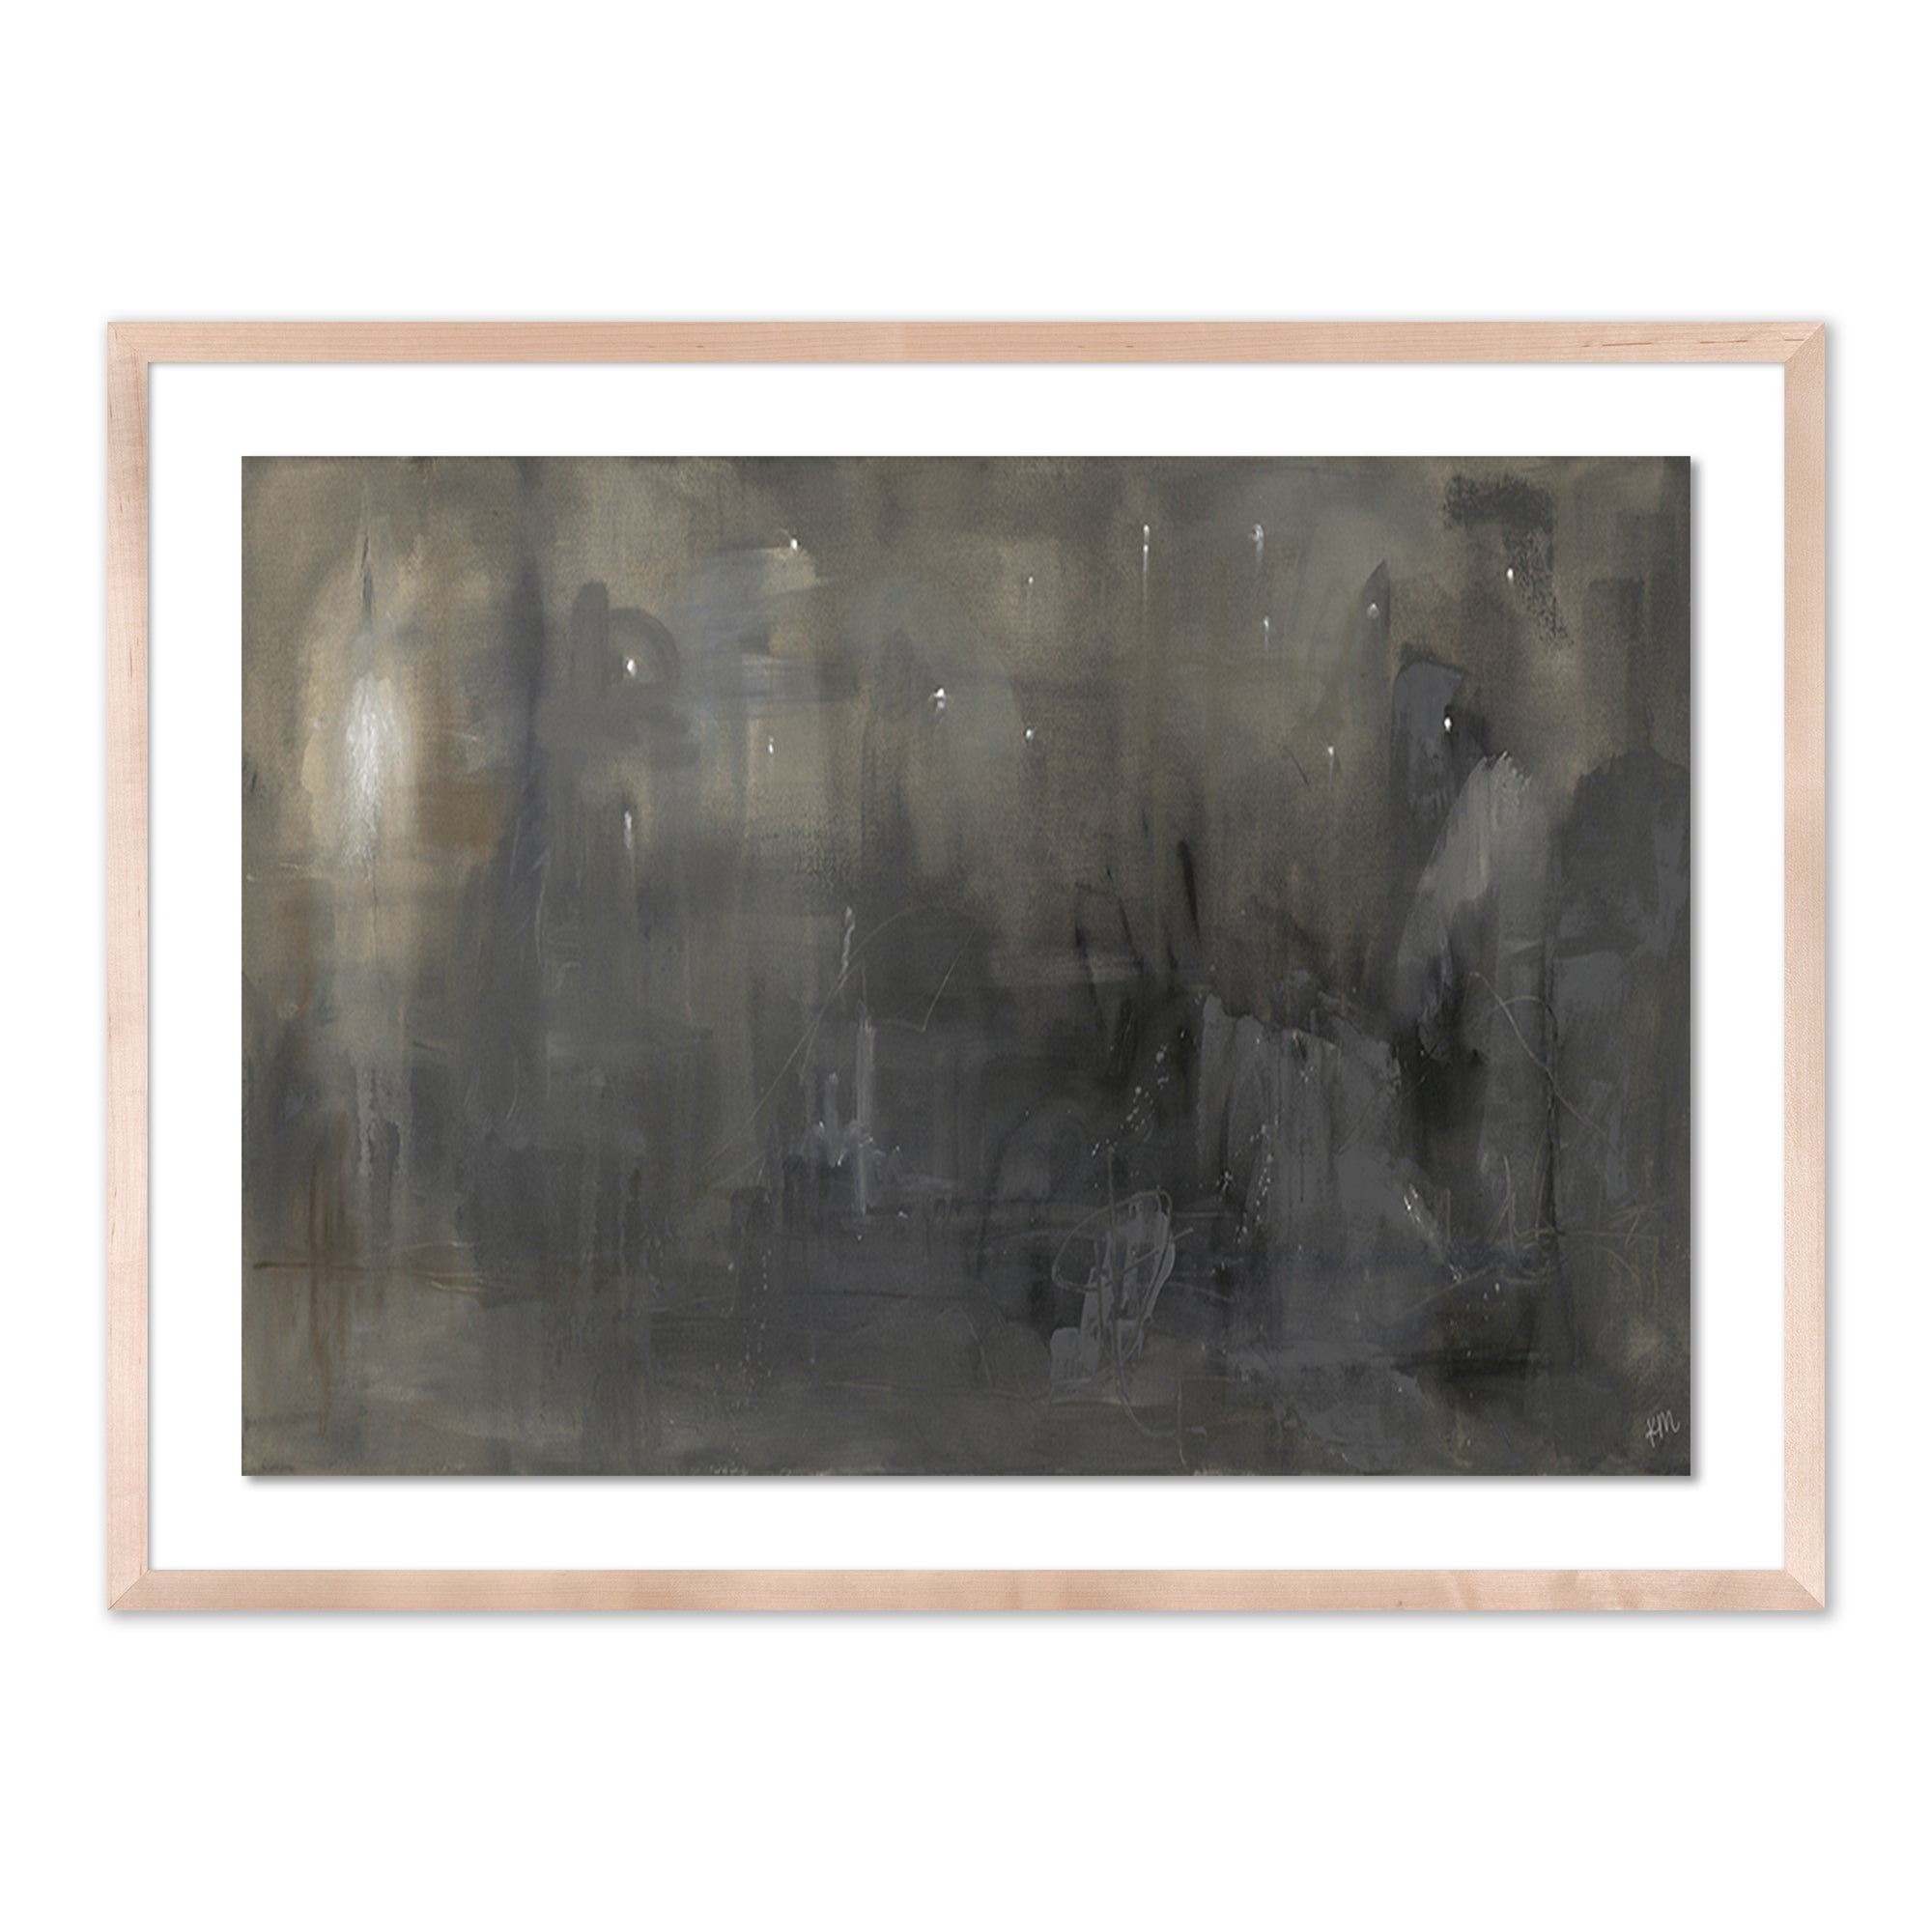 Framed art called Night Divine by Katie Mulder is Inspired by a night sky in the countryside $588.00